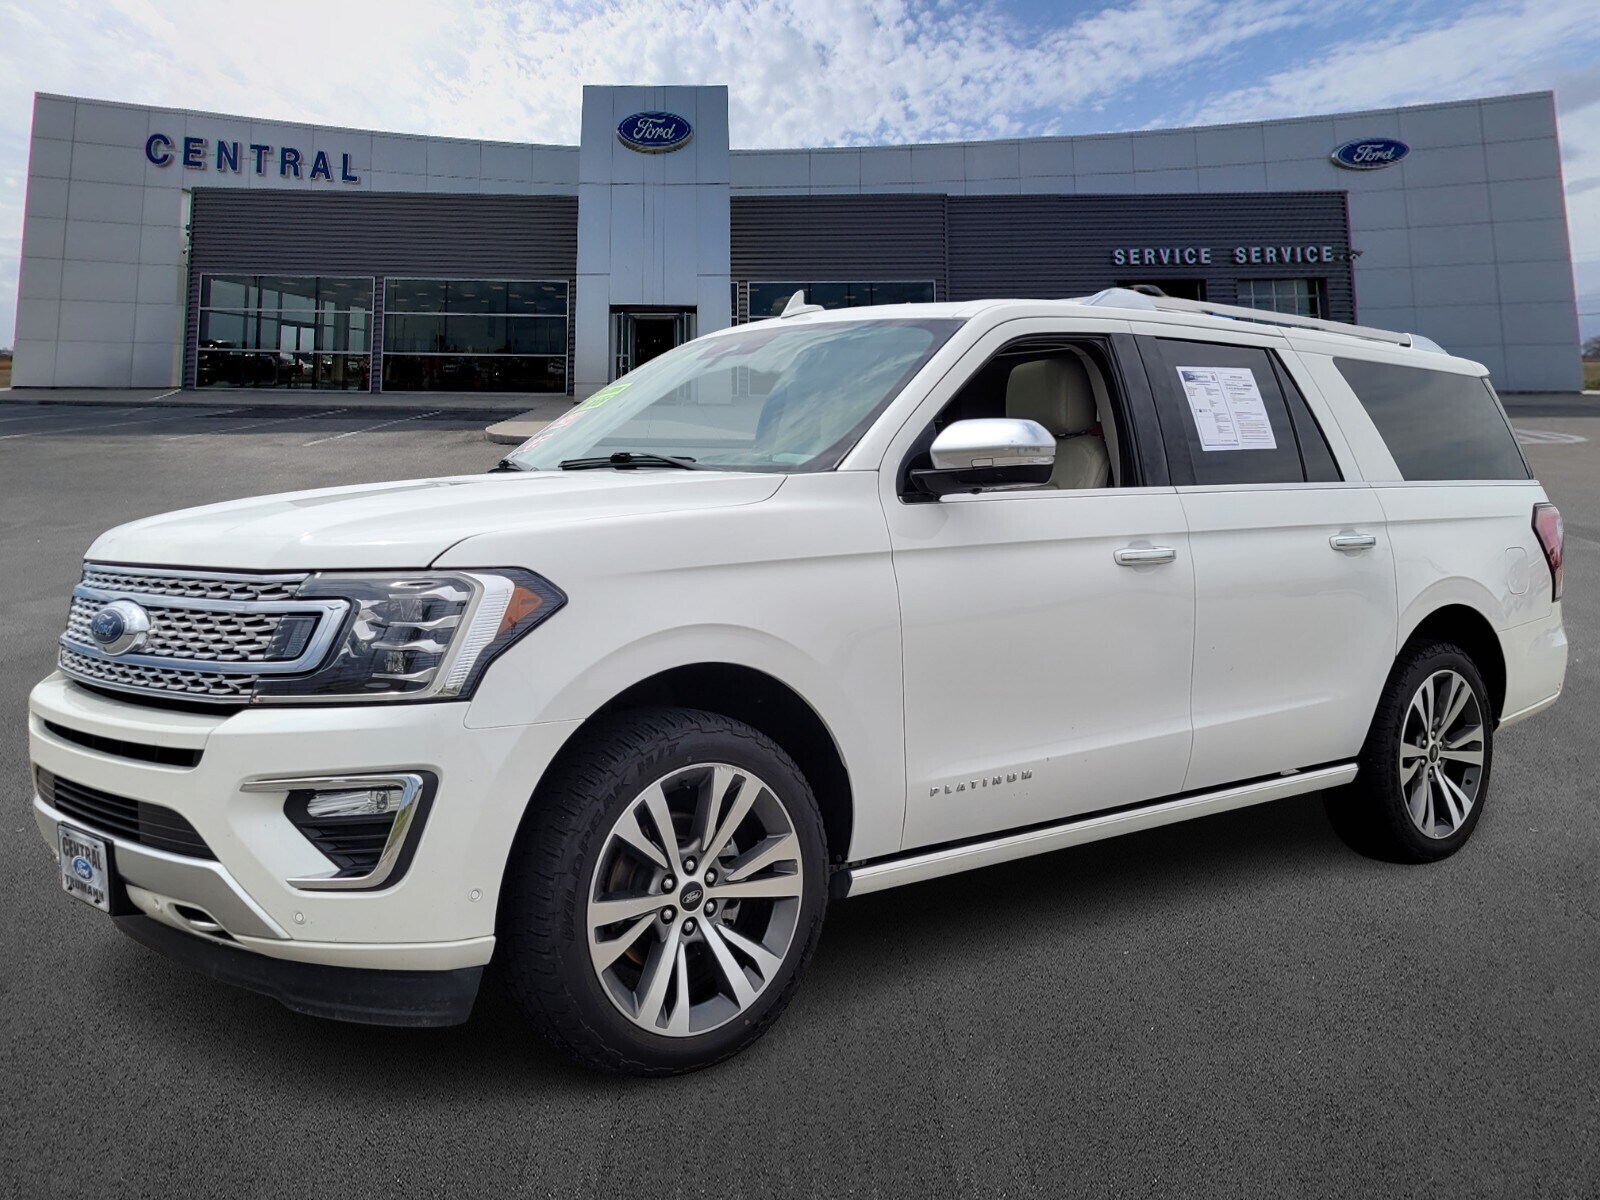 2020 Ford Expedition Max SUV 